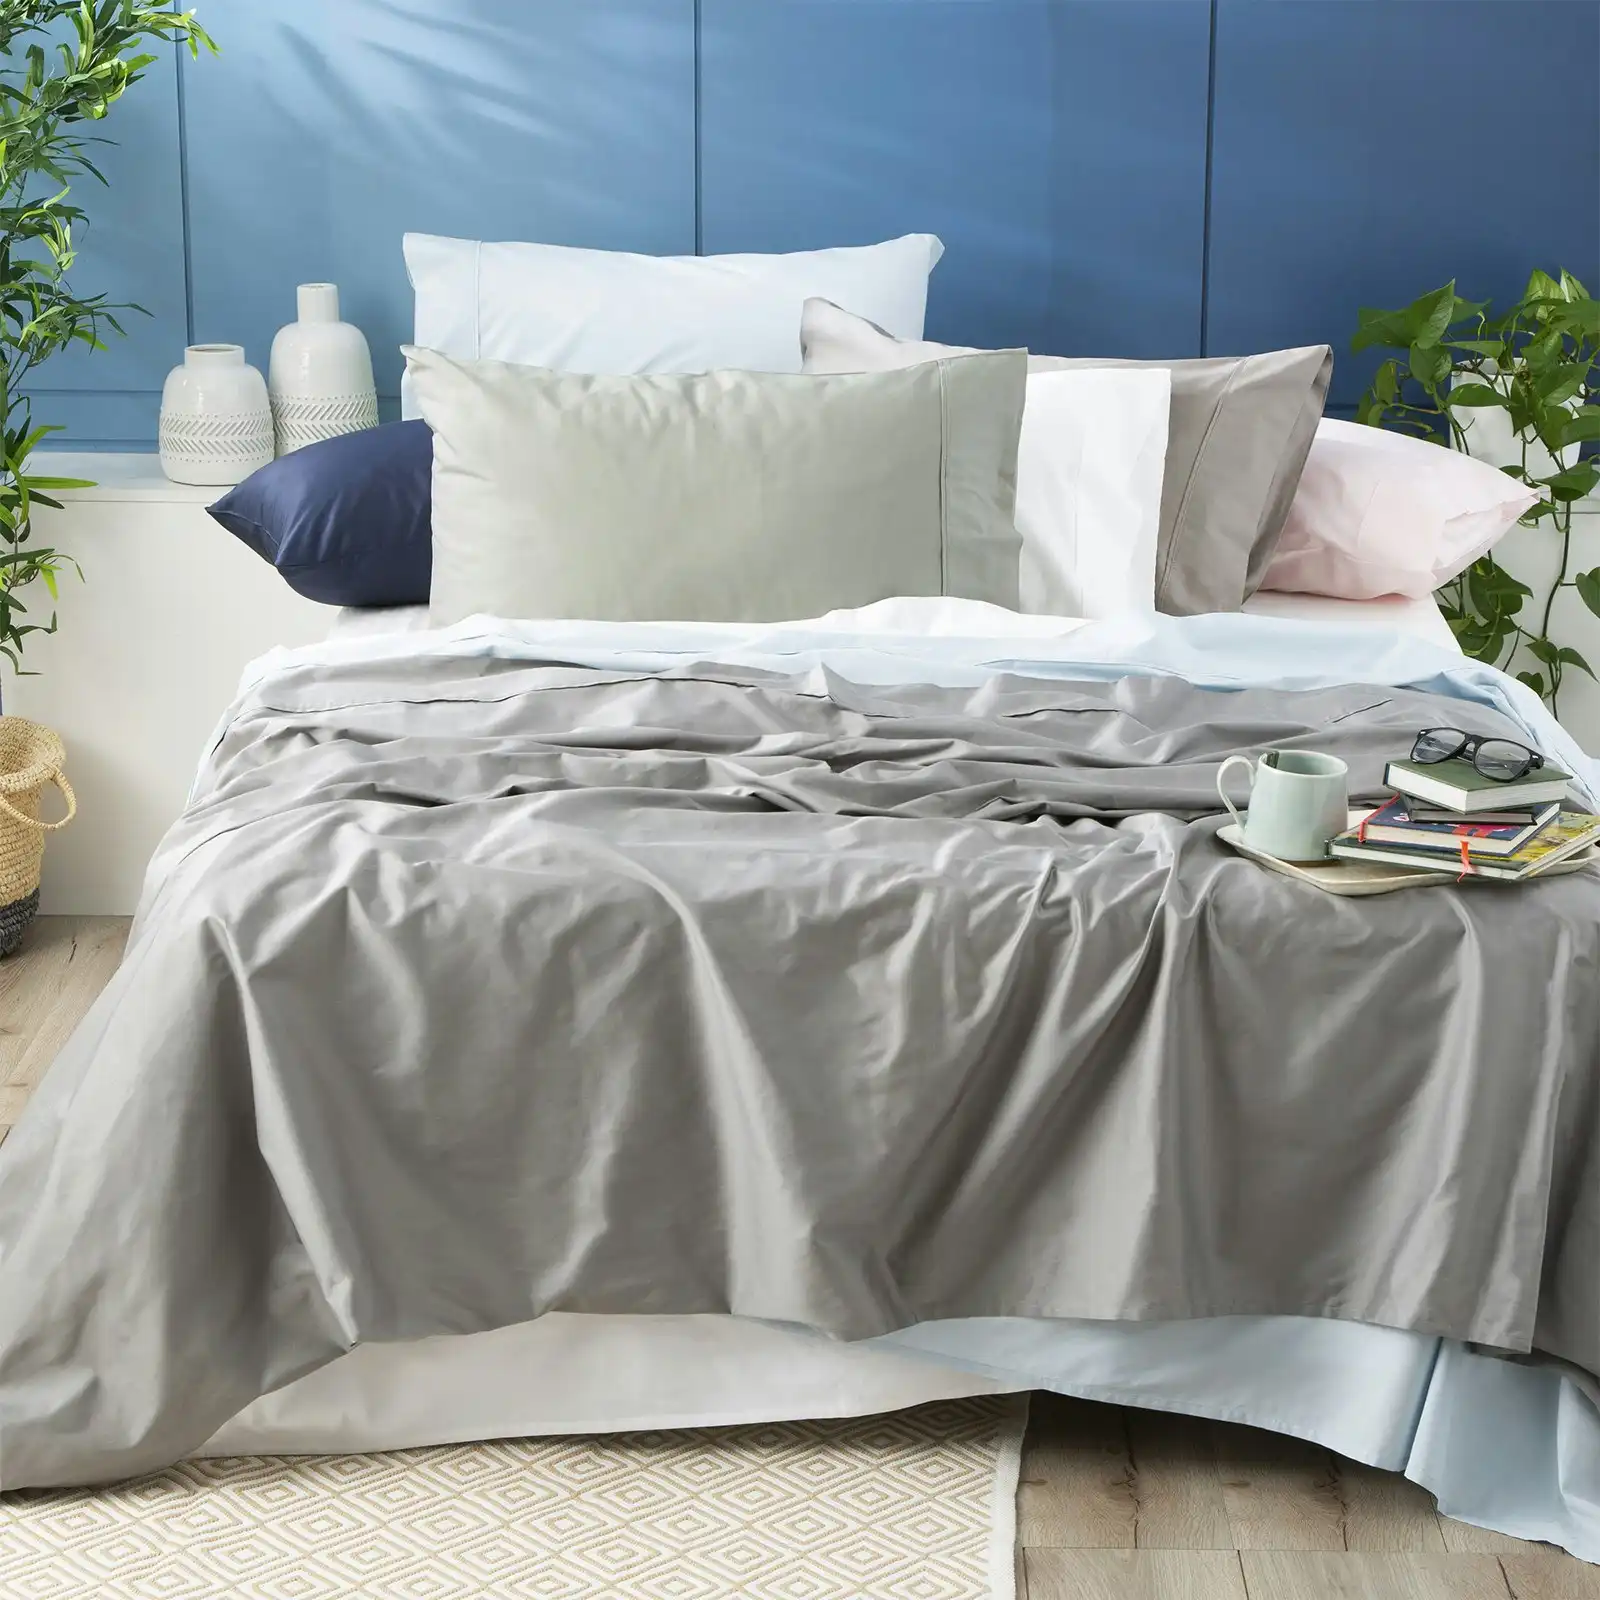 Park Avenue Double Bed Sheet/Pillowcases Set 500TC Bamboo Cotton Bedding Pewter